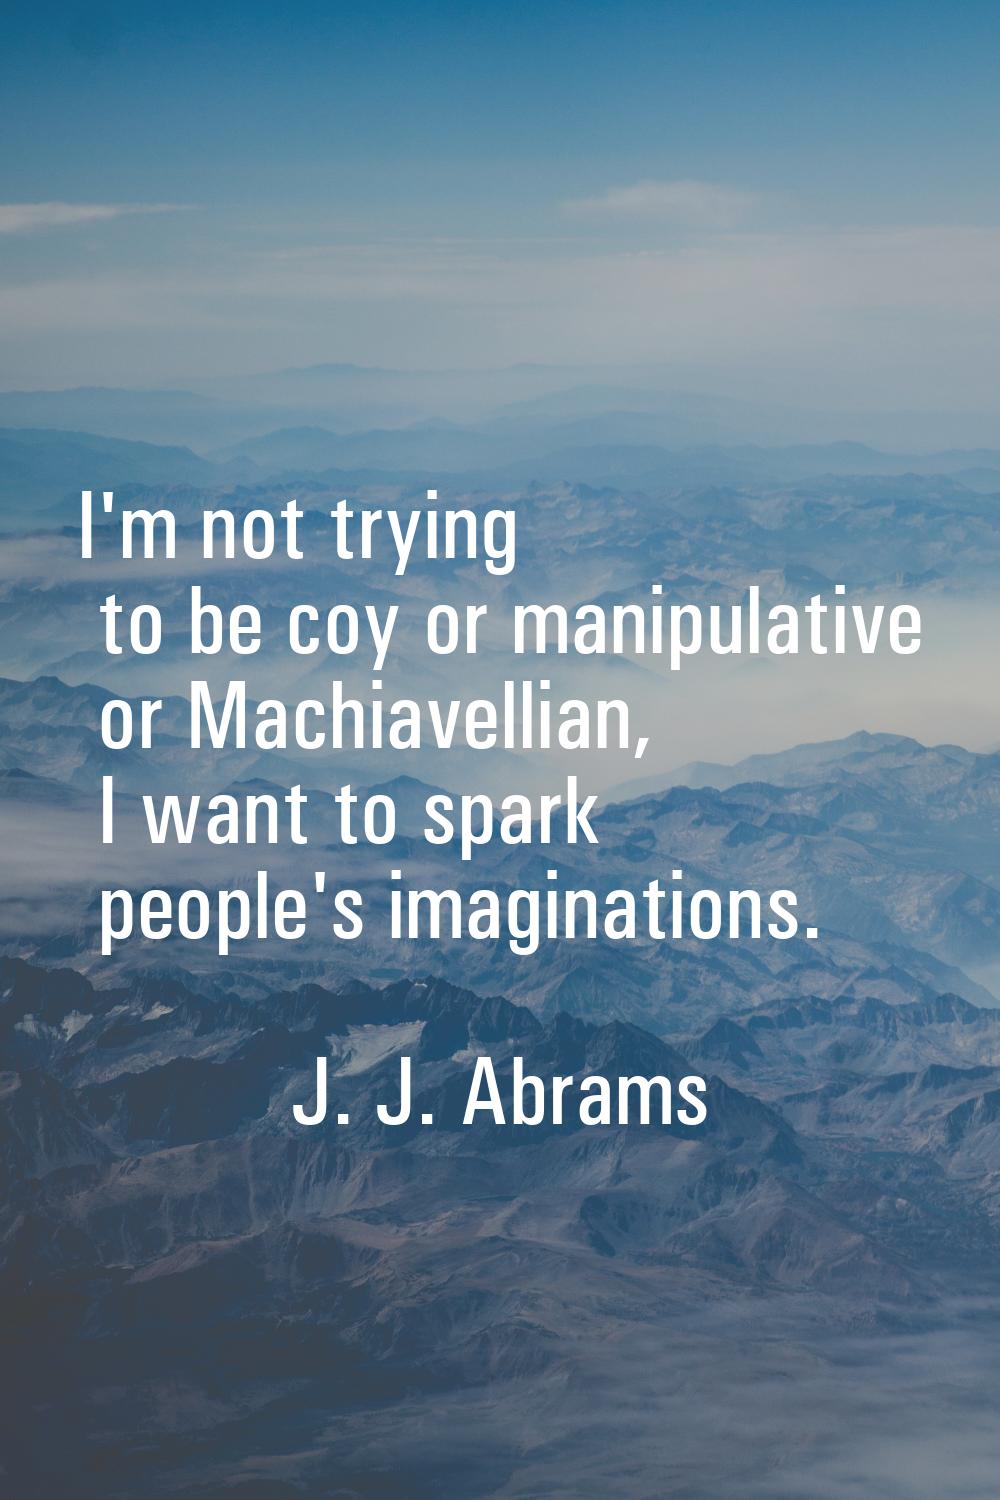 I'm not trying to be coy or manipulative or Machiavellian, I want to spark people's imaginations.